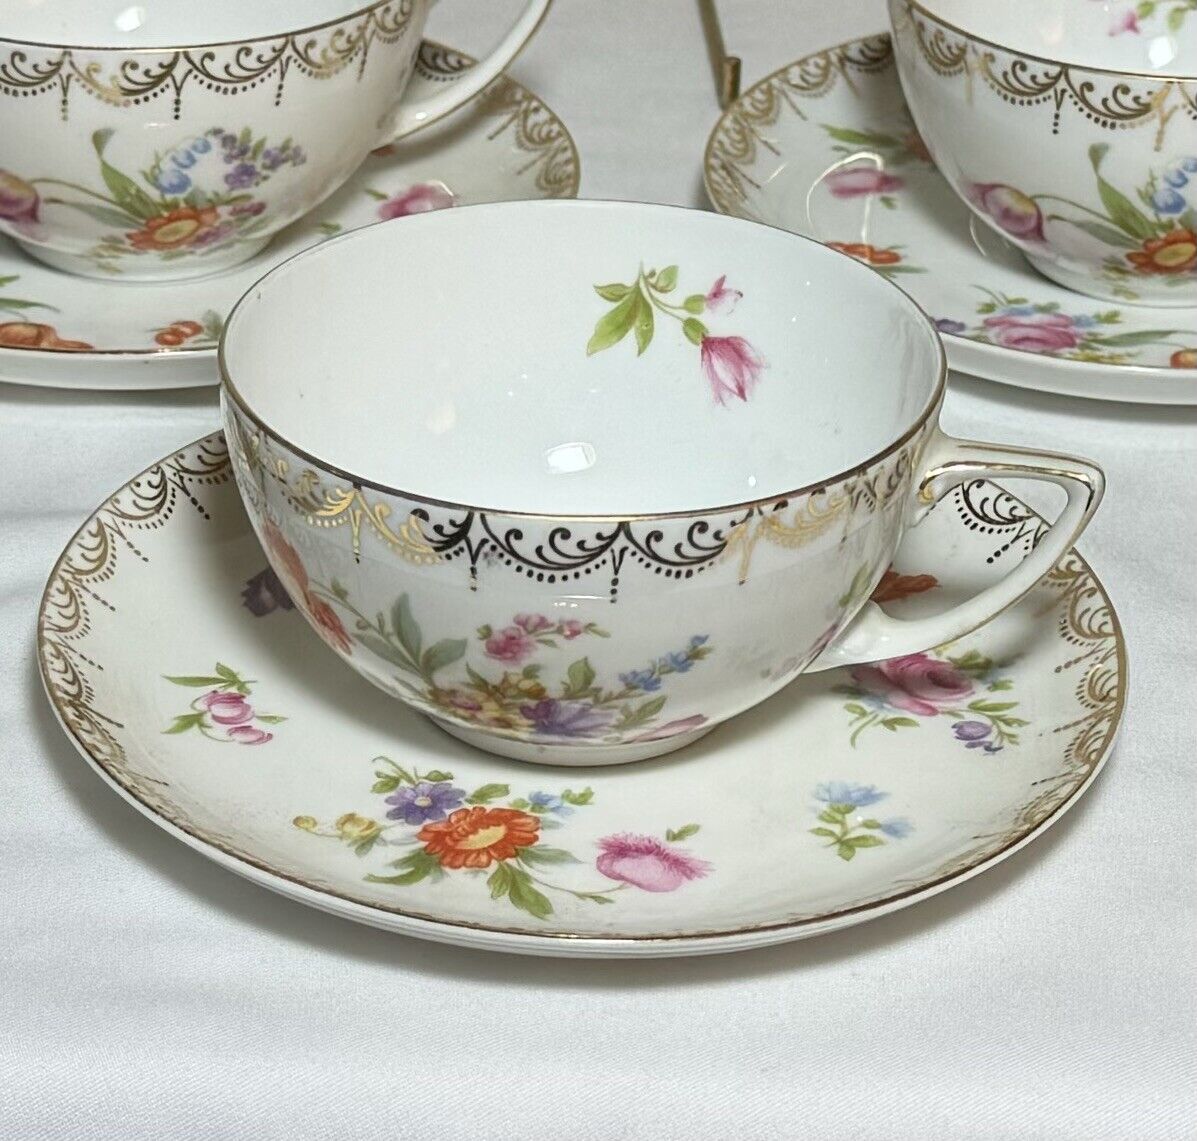 SET of 5 Vintage Rosenthal MEISSEN Tea Cups and Saucers, Plus One Extra Saucer